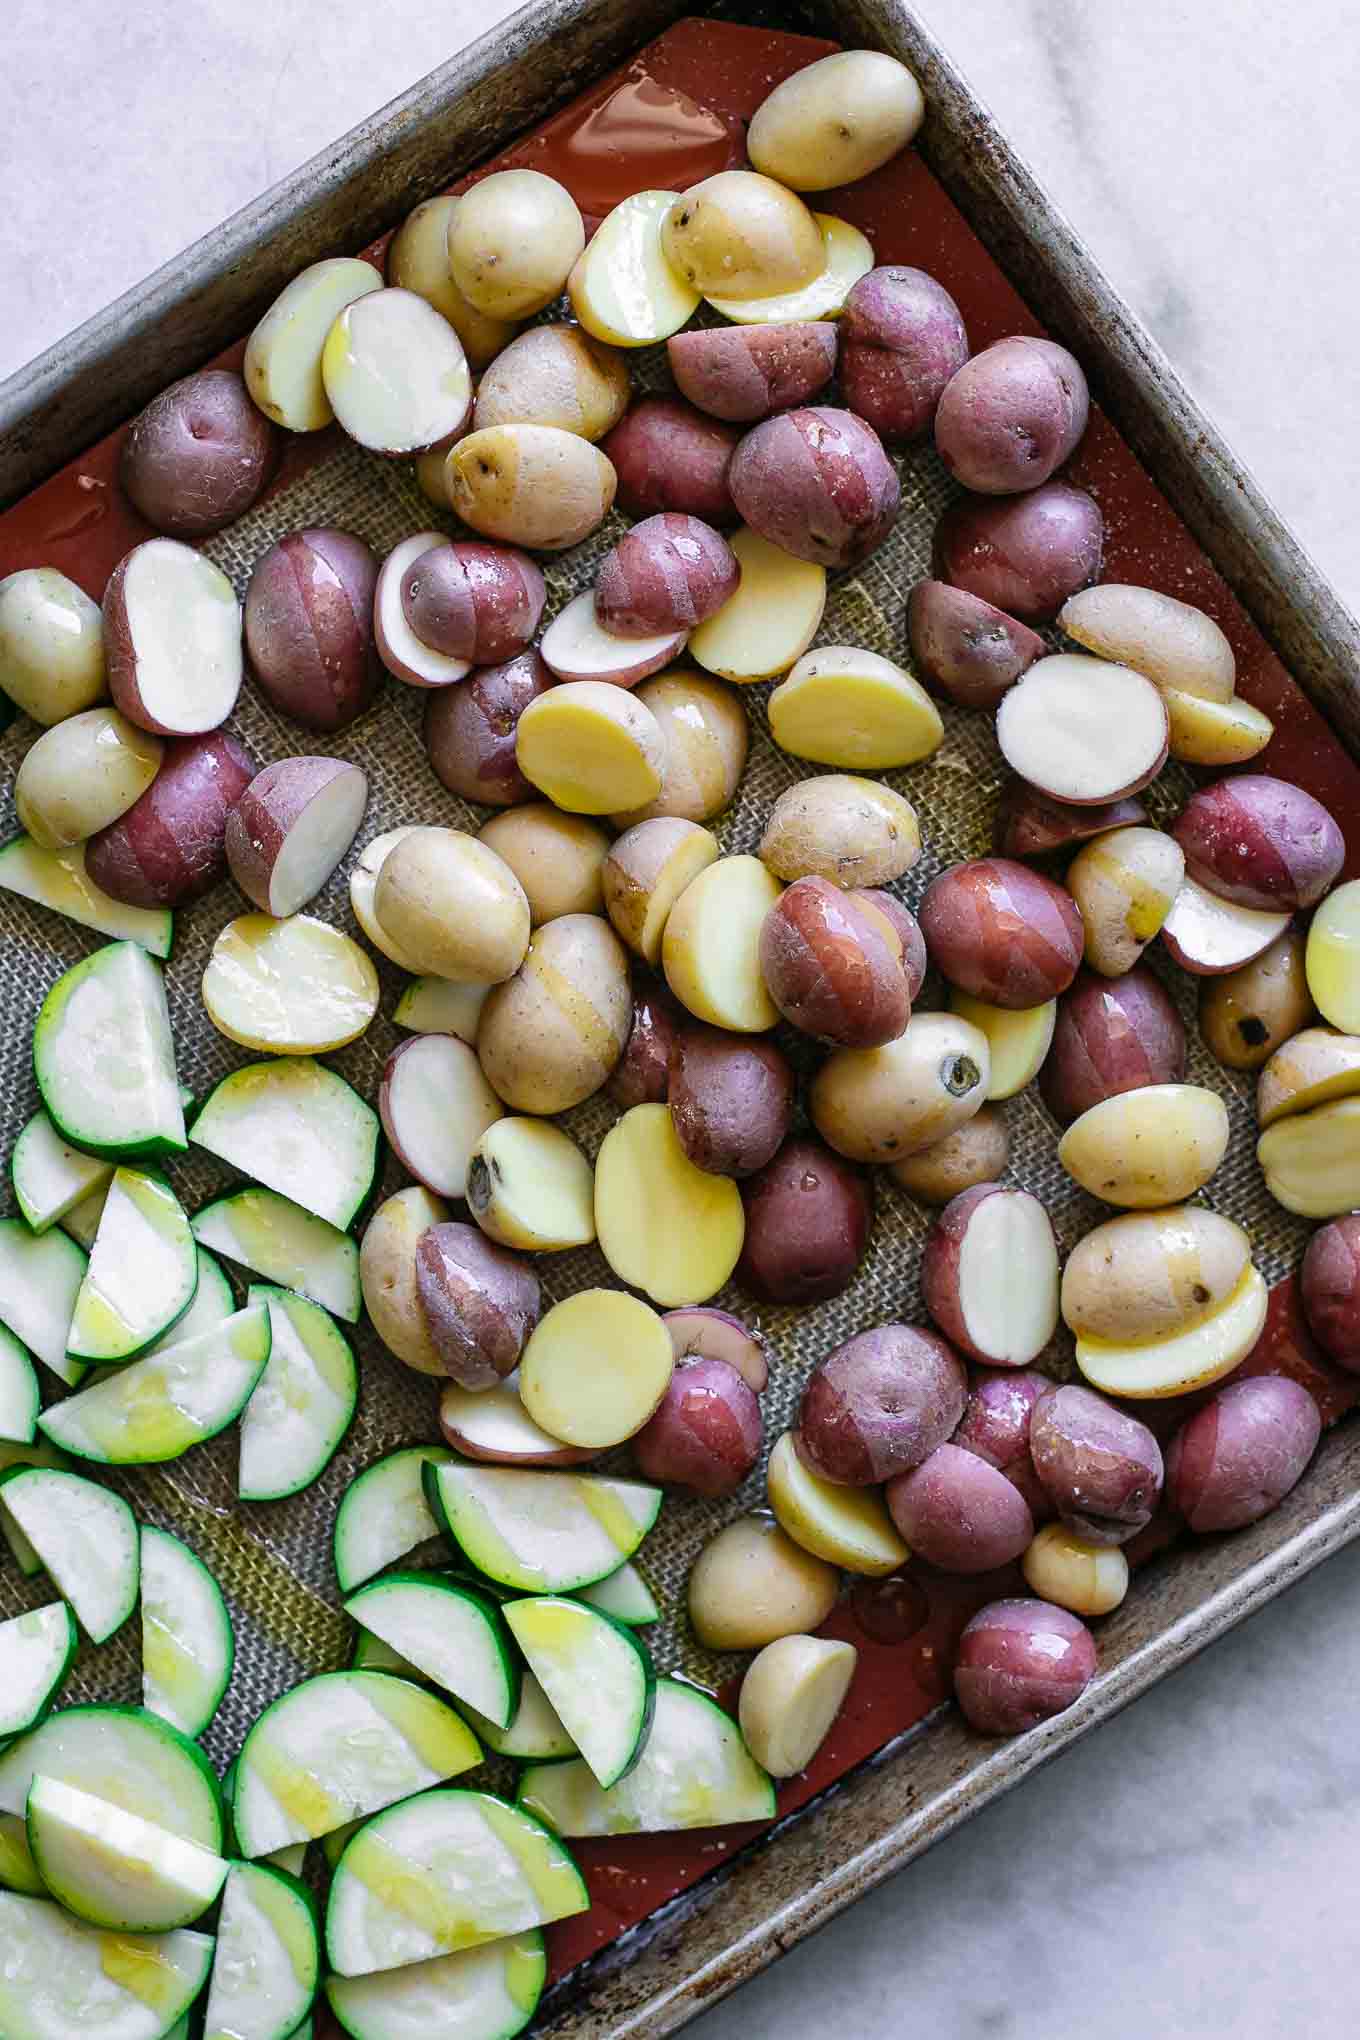 sliced potatoes and zucchini on a baking sheet before roasting